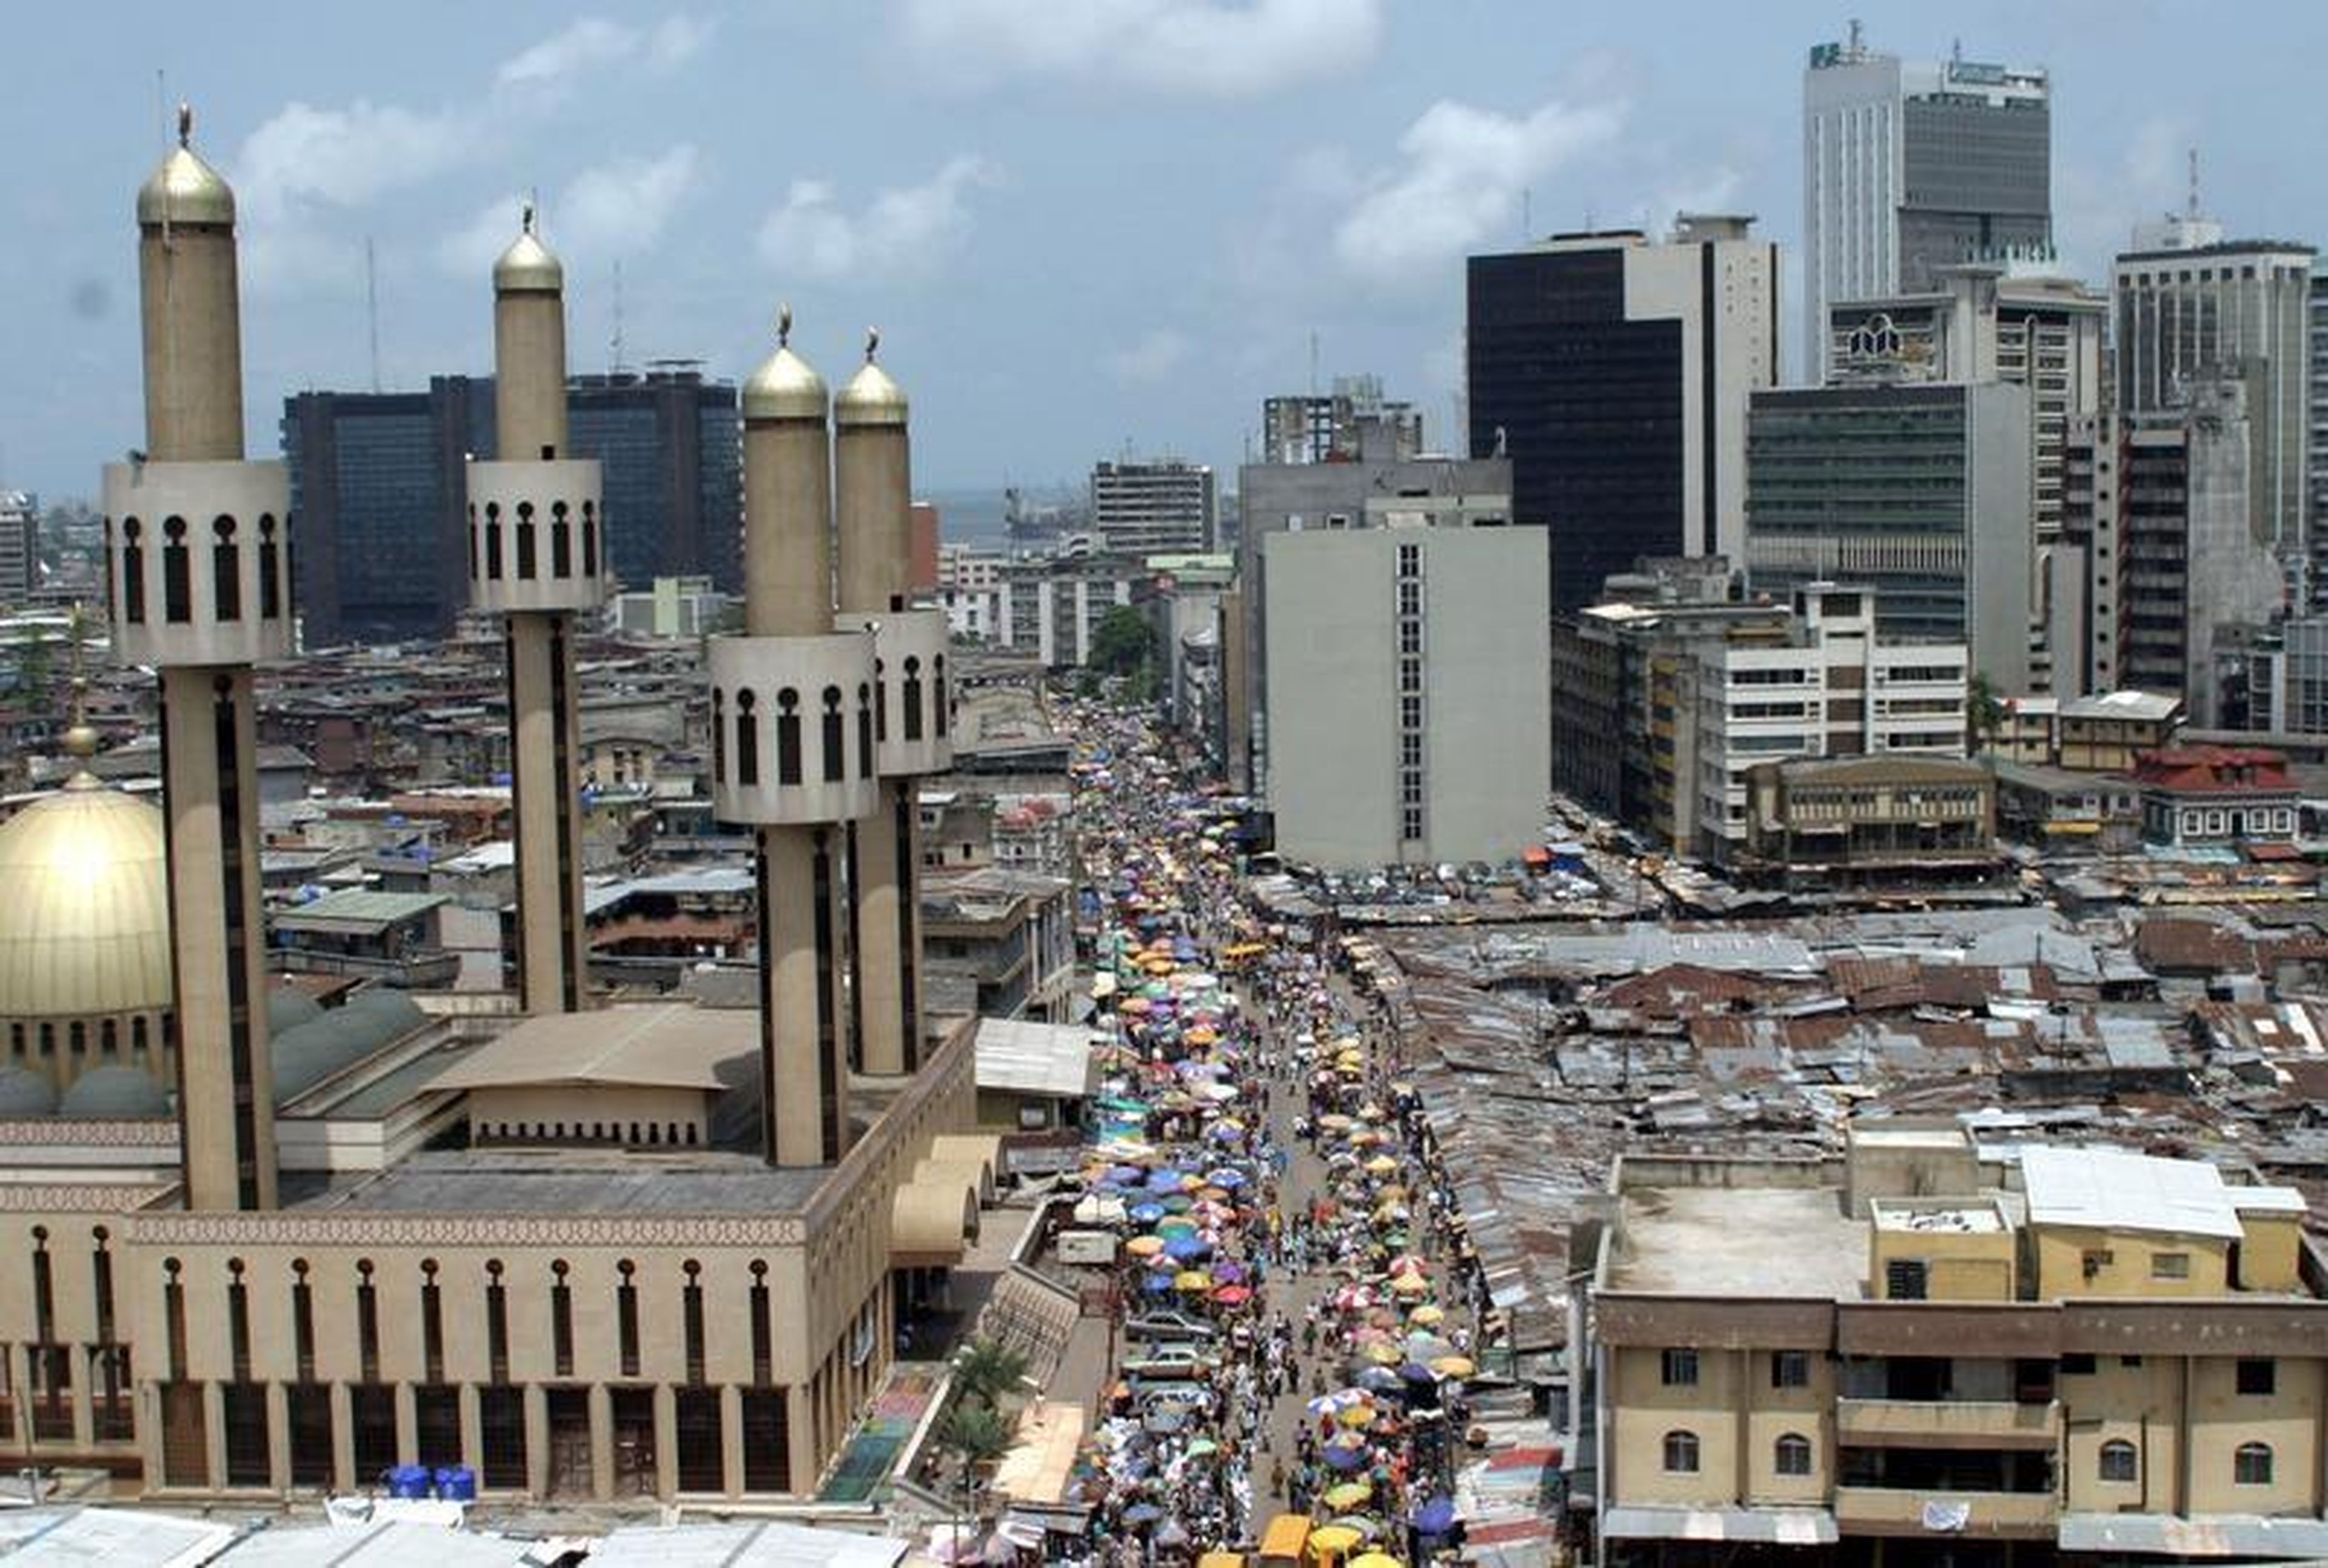 People and traffic move along a busy street in Lagos.